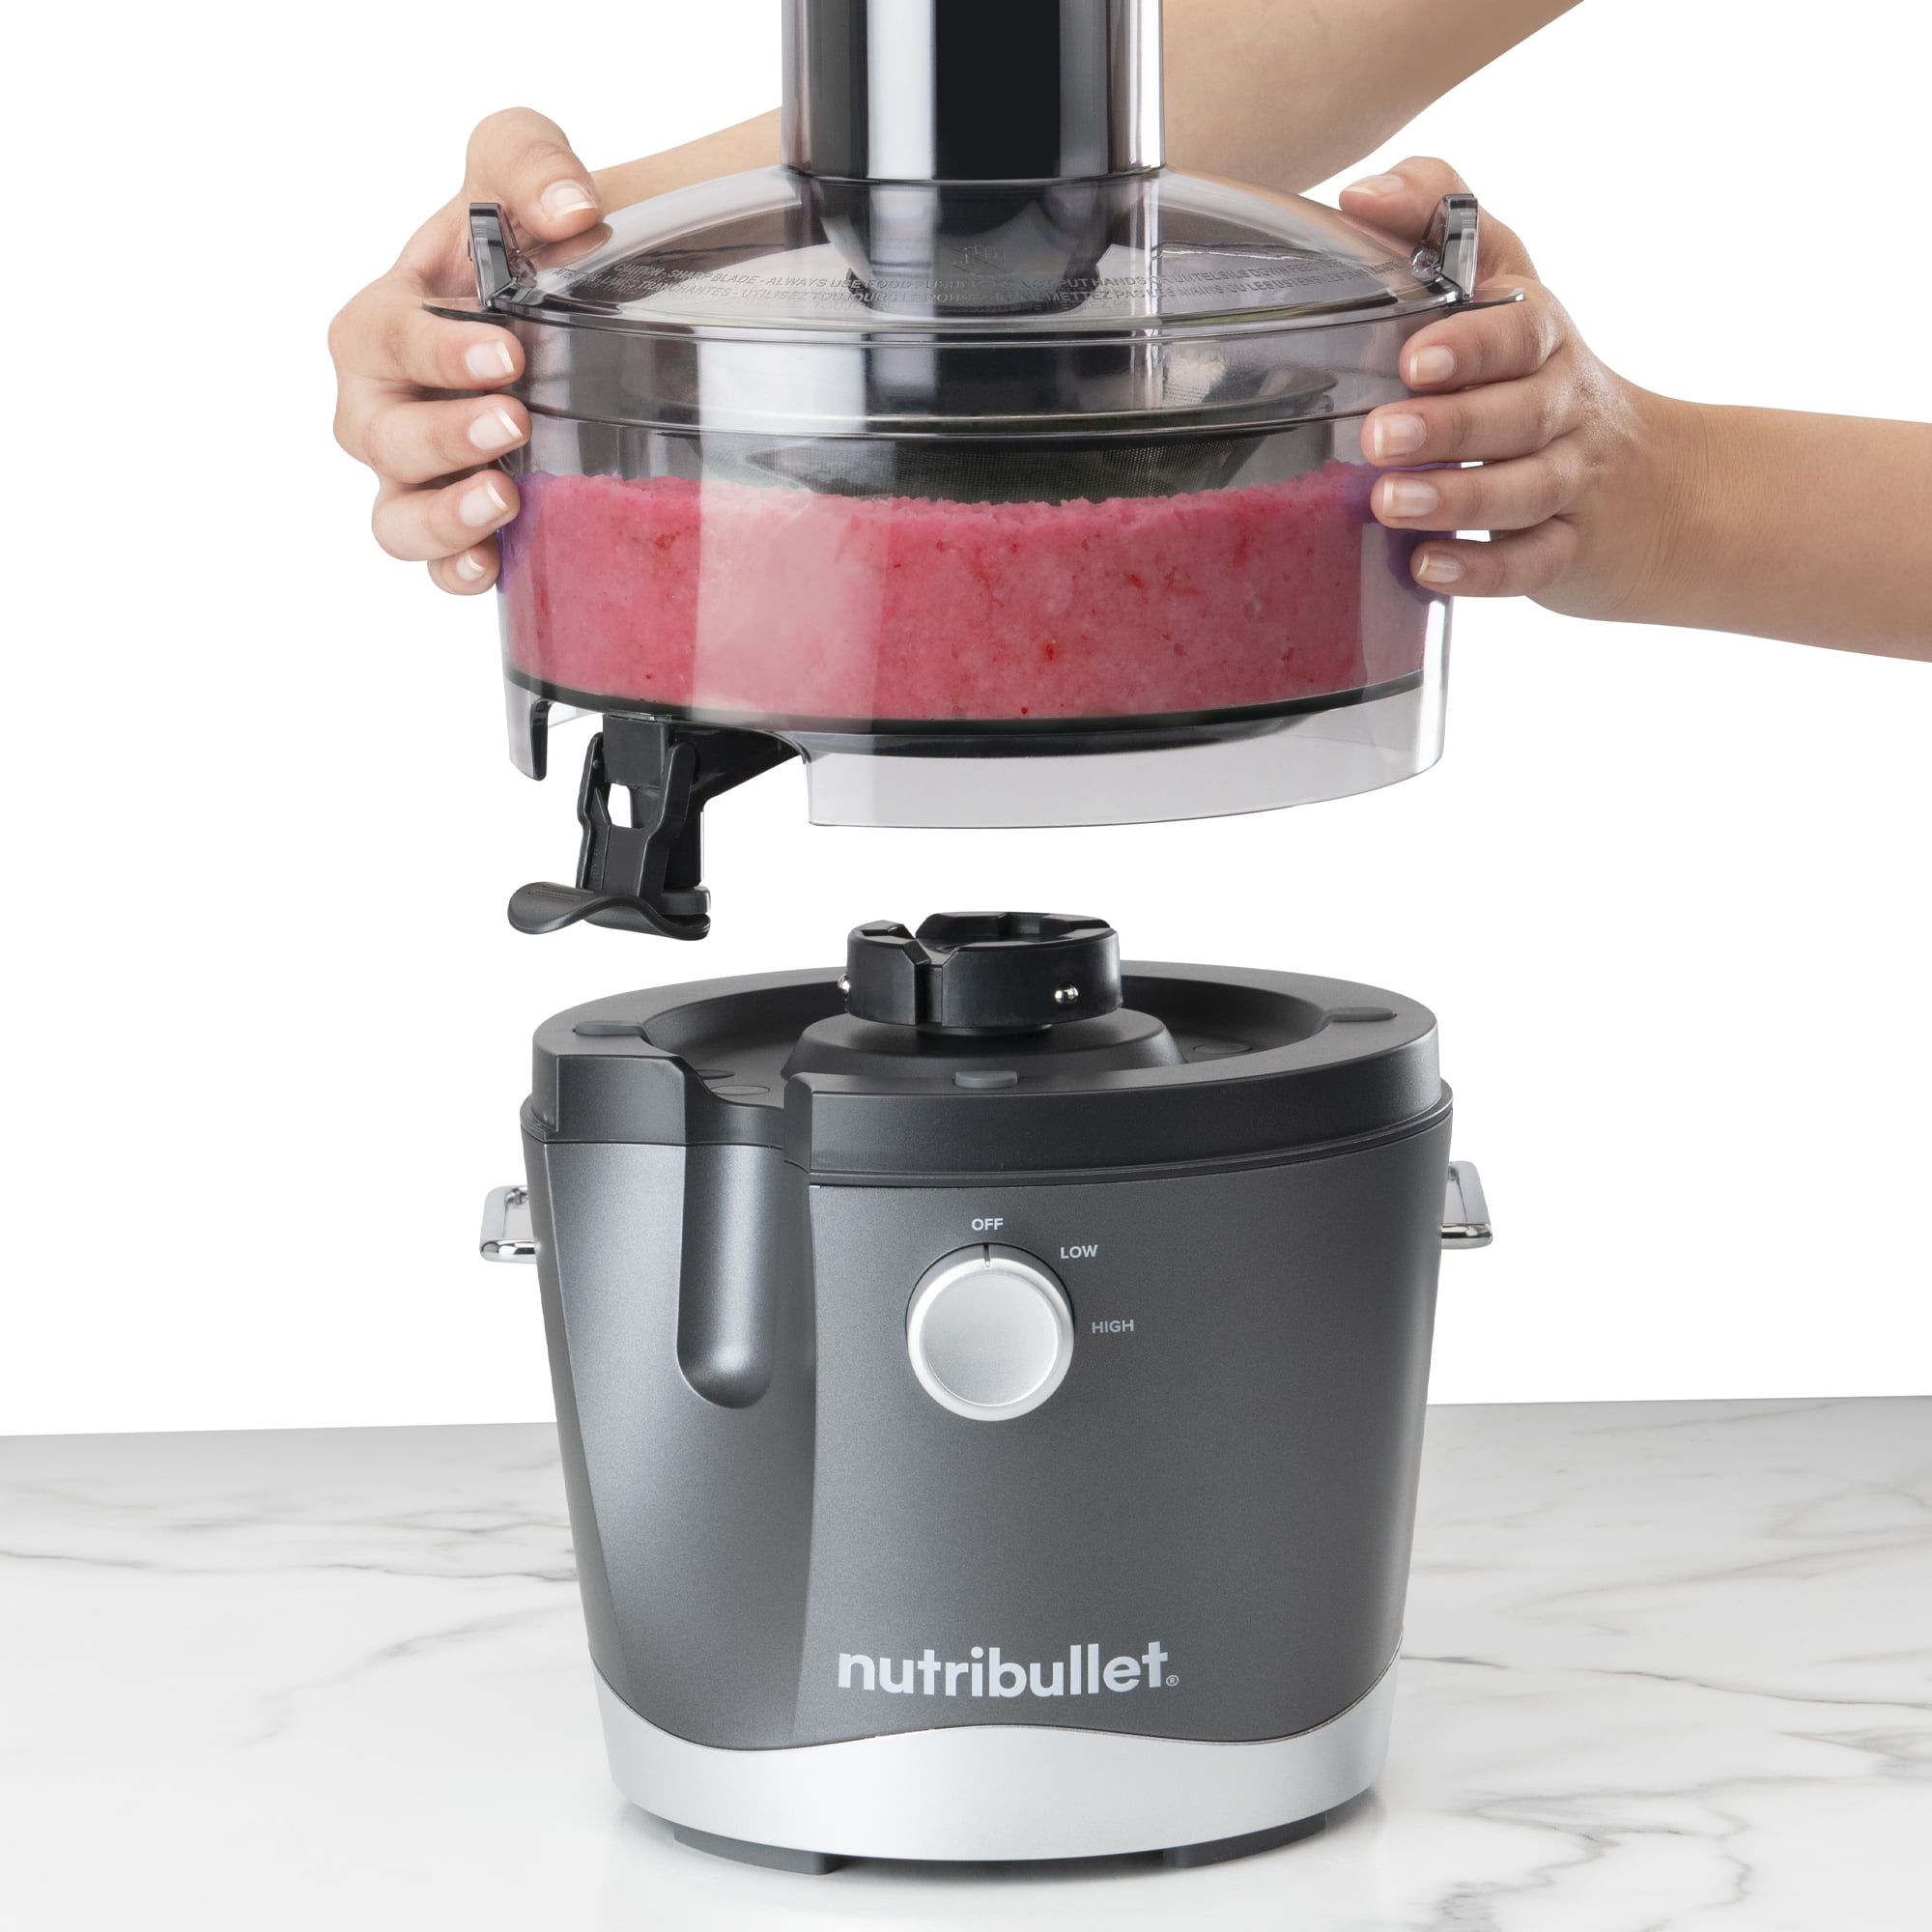 nutribullet Nutribullet Juicer Pro - Lockable Extractor with UL Safety  Listing - Silver - 1000-Watt Motor - Dishwasher-Safe - Includes Accessories  in the Juicers department at